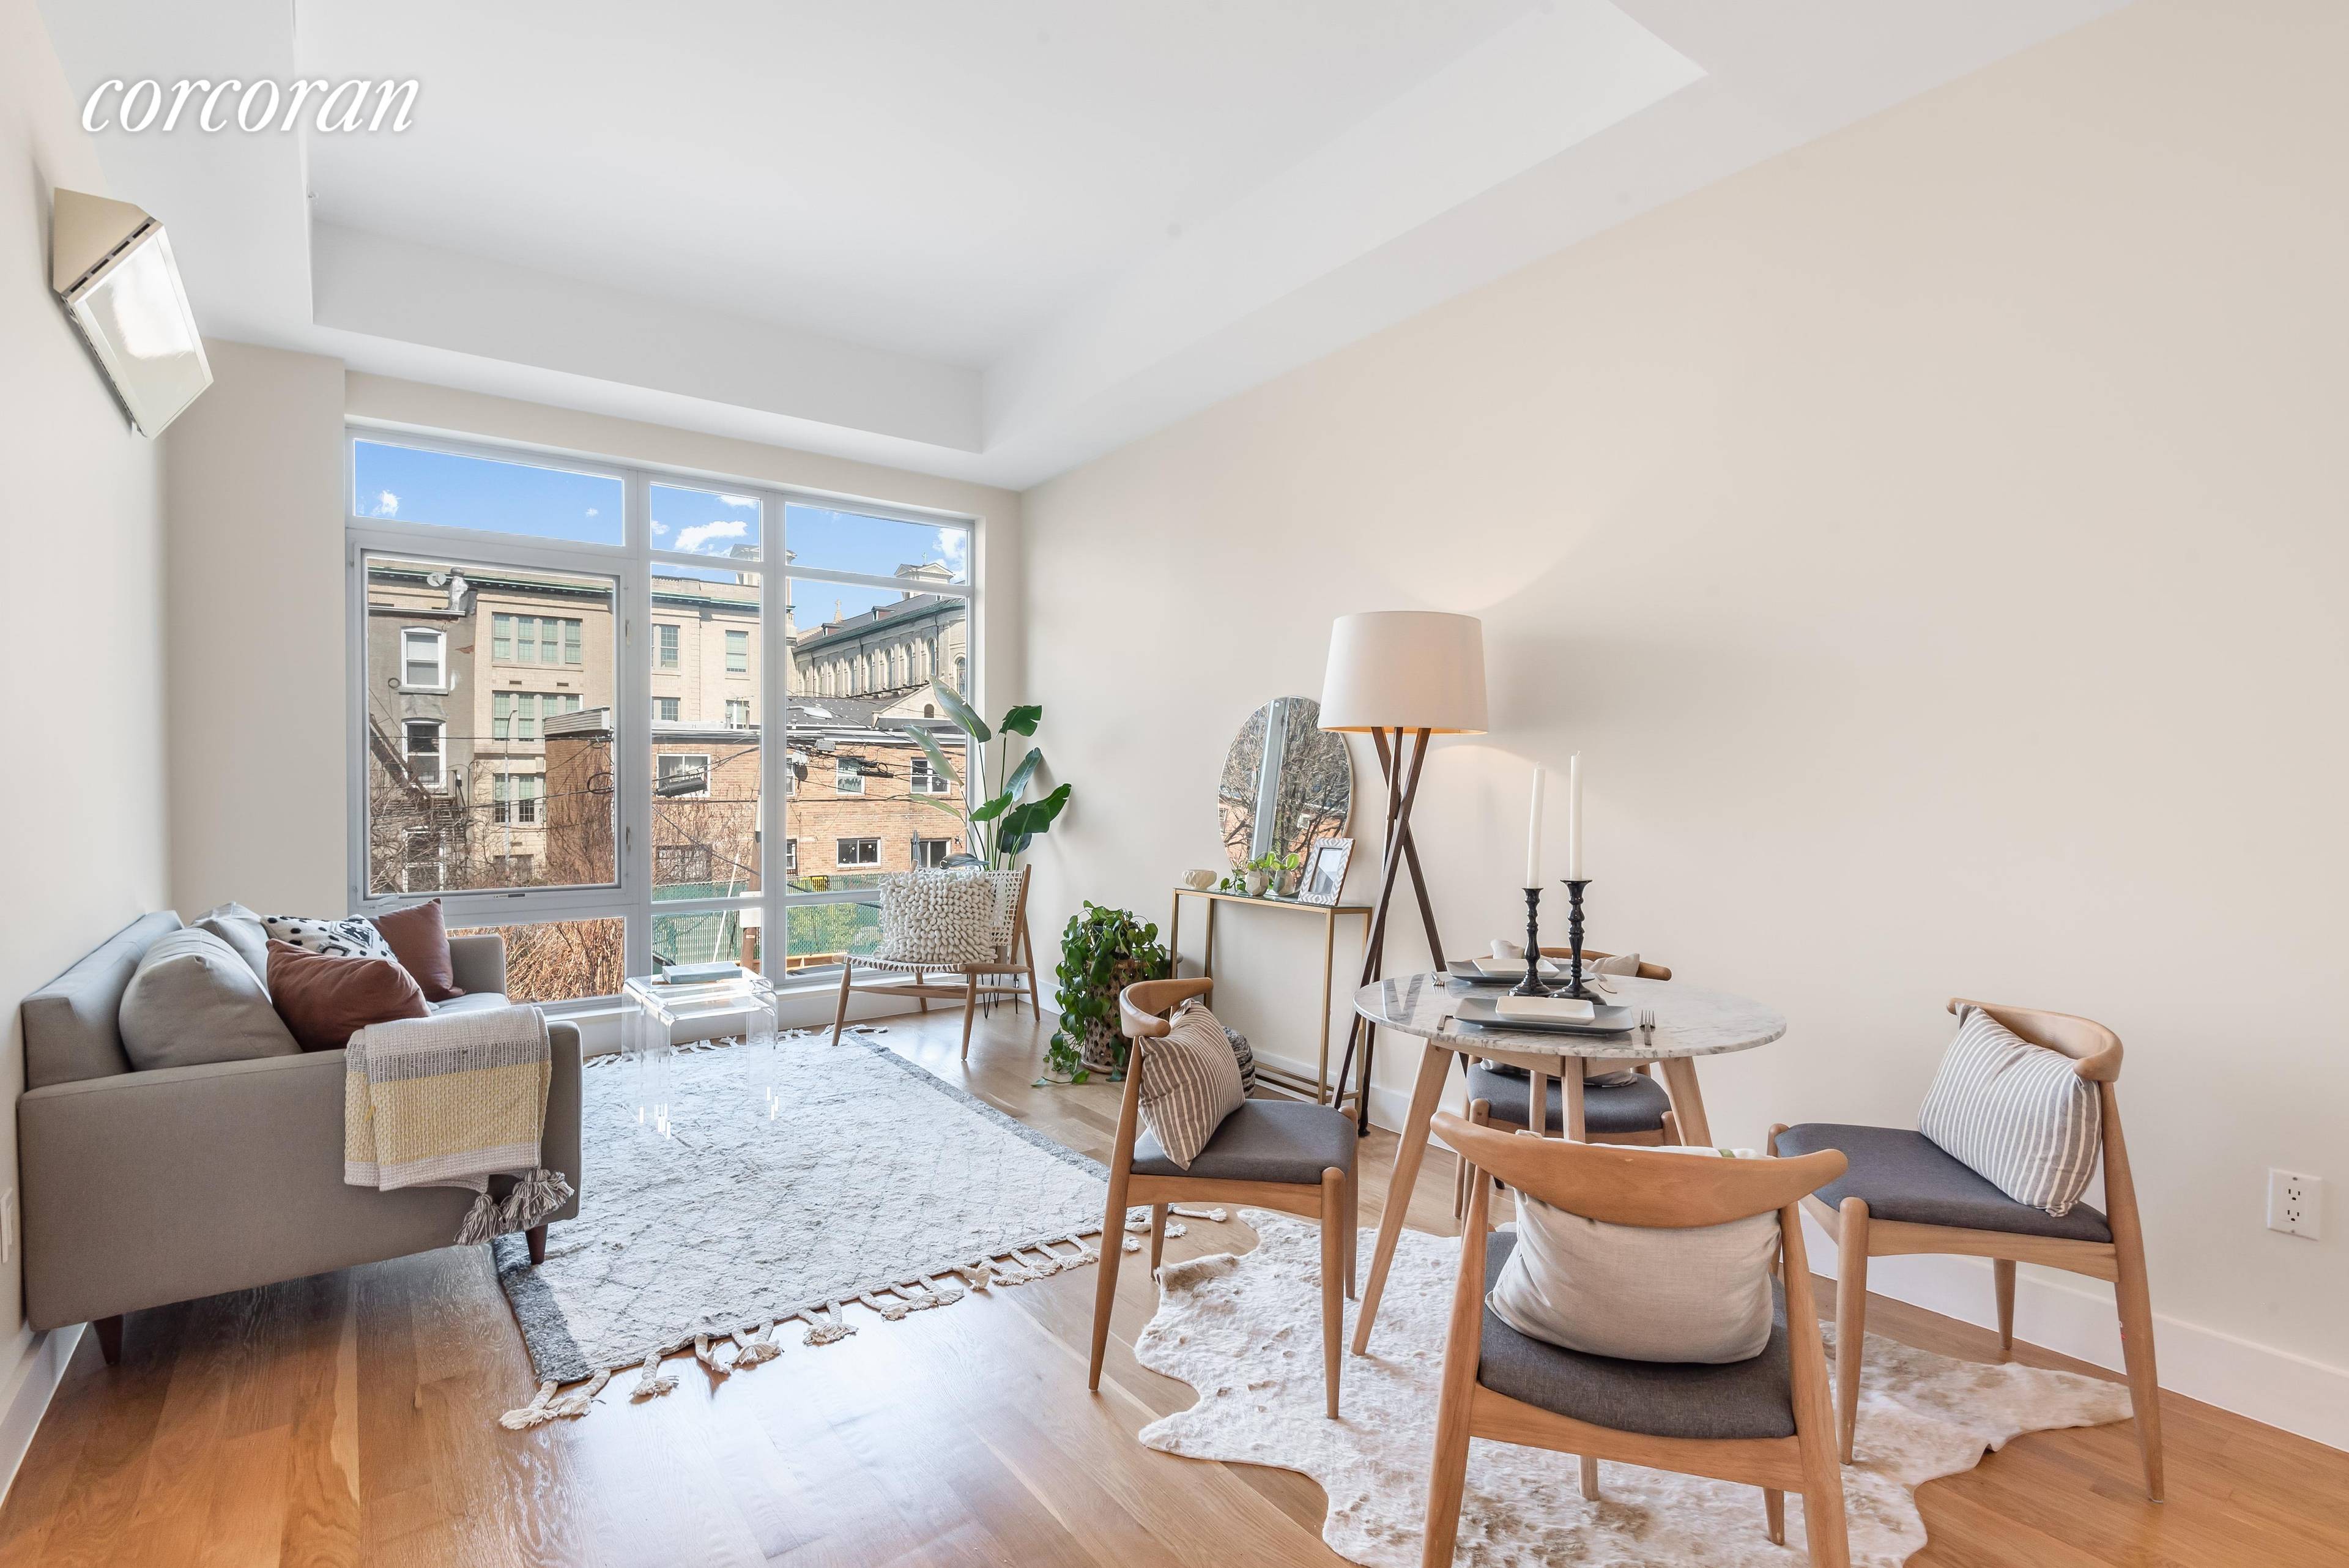 Welcome to 659 Bergen Street 2C, a sunny one bedroom one bathroom home in a boutique elevator condo building in prime Prospect Heights !